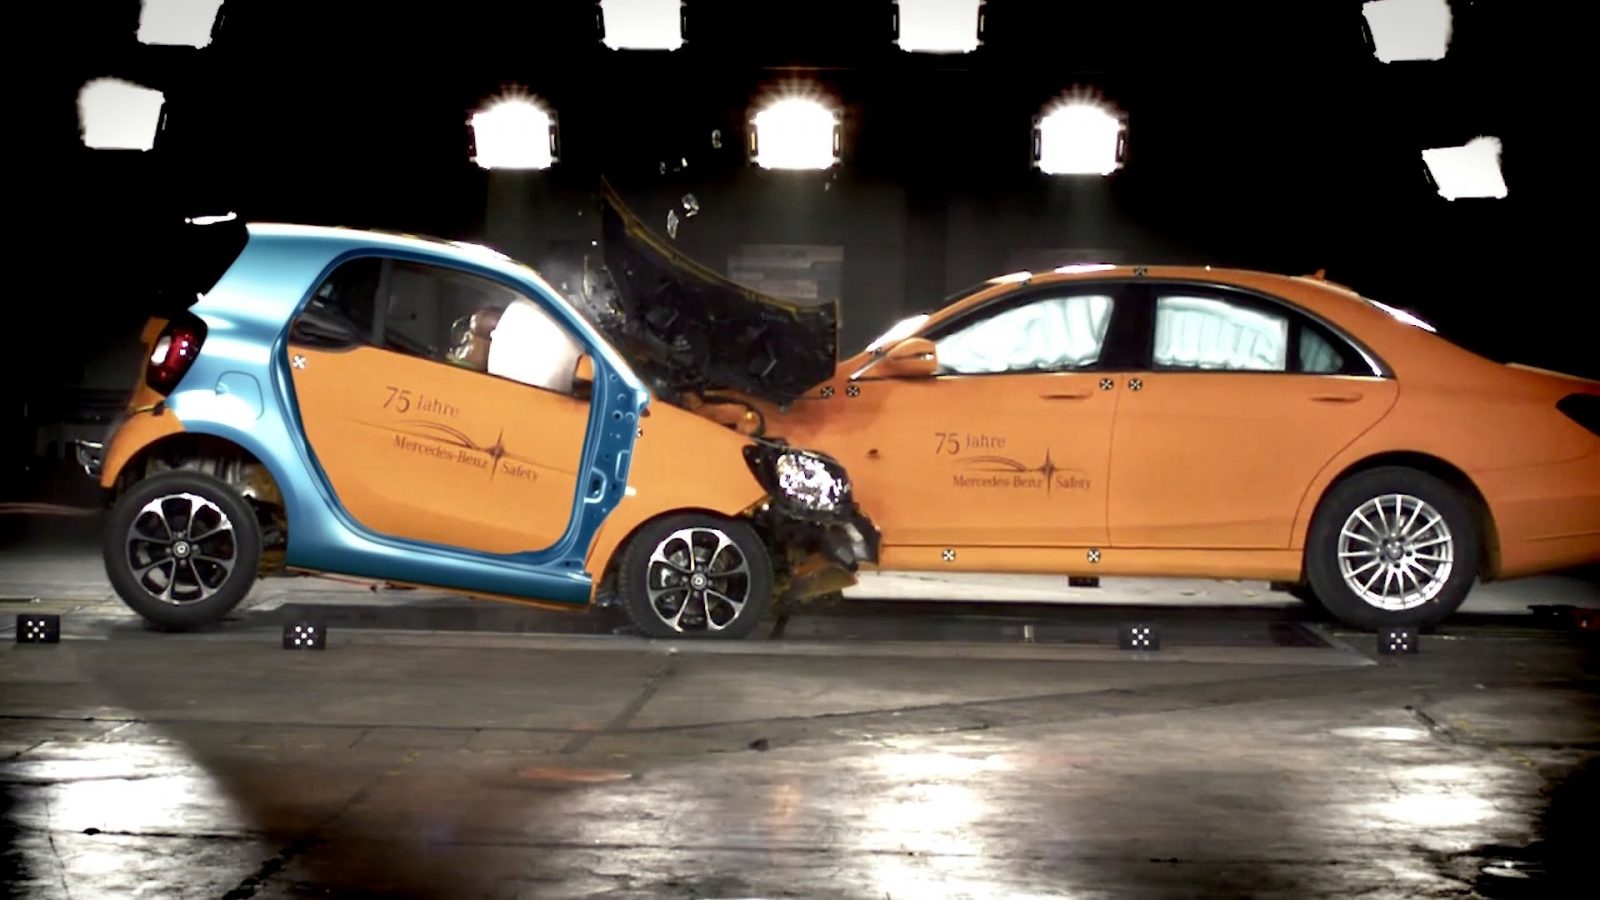 The 2015 Smart just about holding its own against a 2 ton Mercedes S-class. 